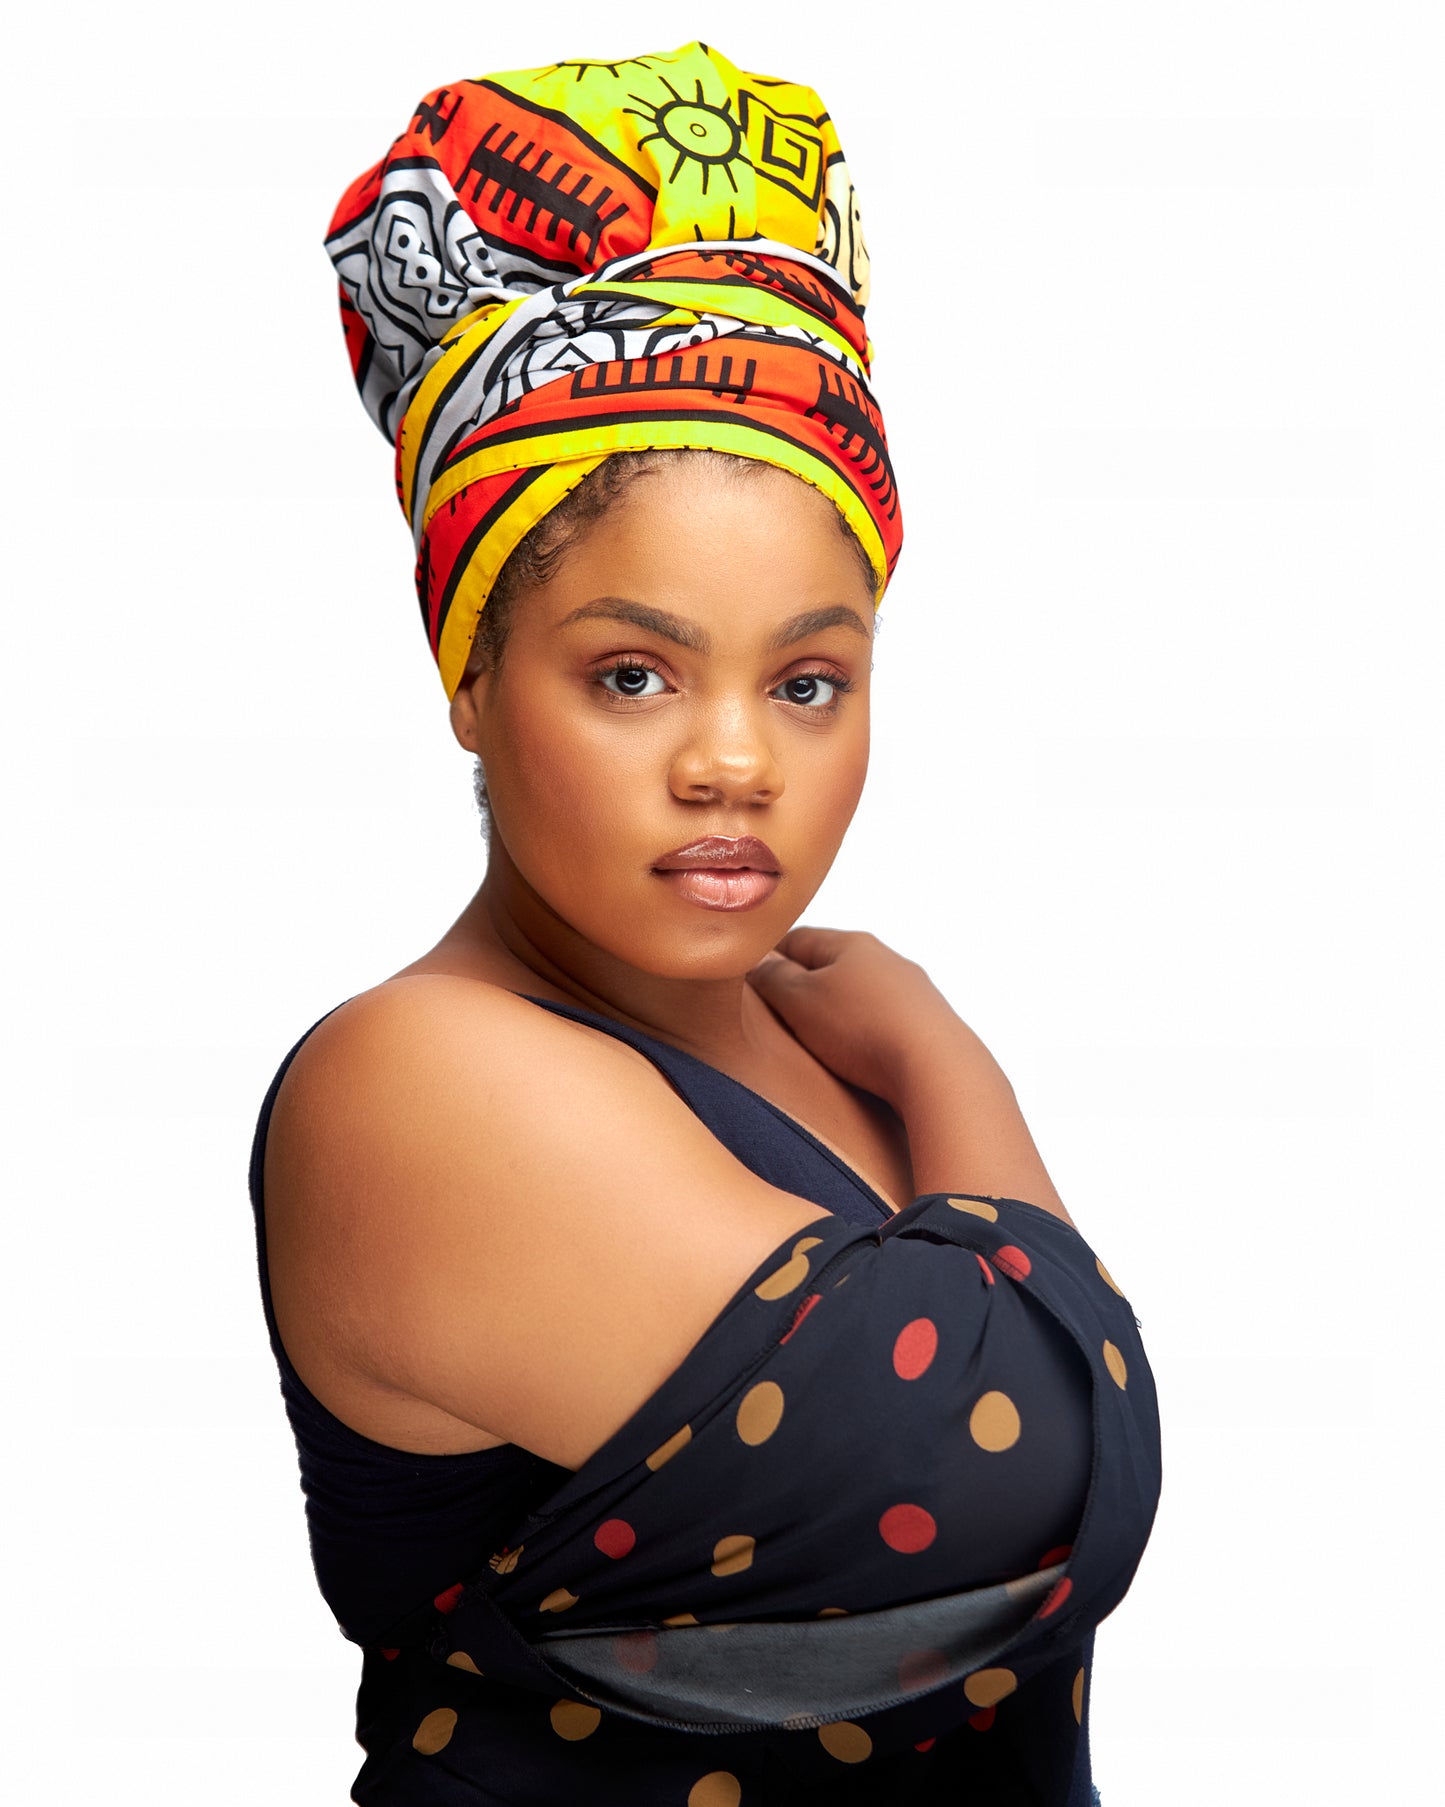 Ankara Wax Print Made of Ash, Yellow, Gold,Red And Black Blend of Beautiful Colours And Pattern, Hand Made Elastic Silklined Bonnet With Band